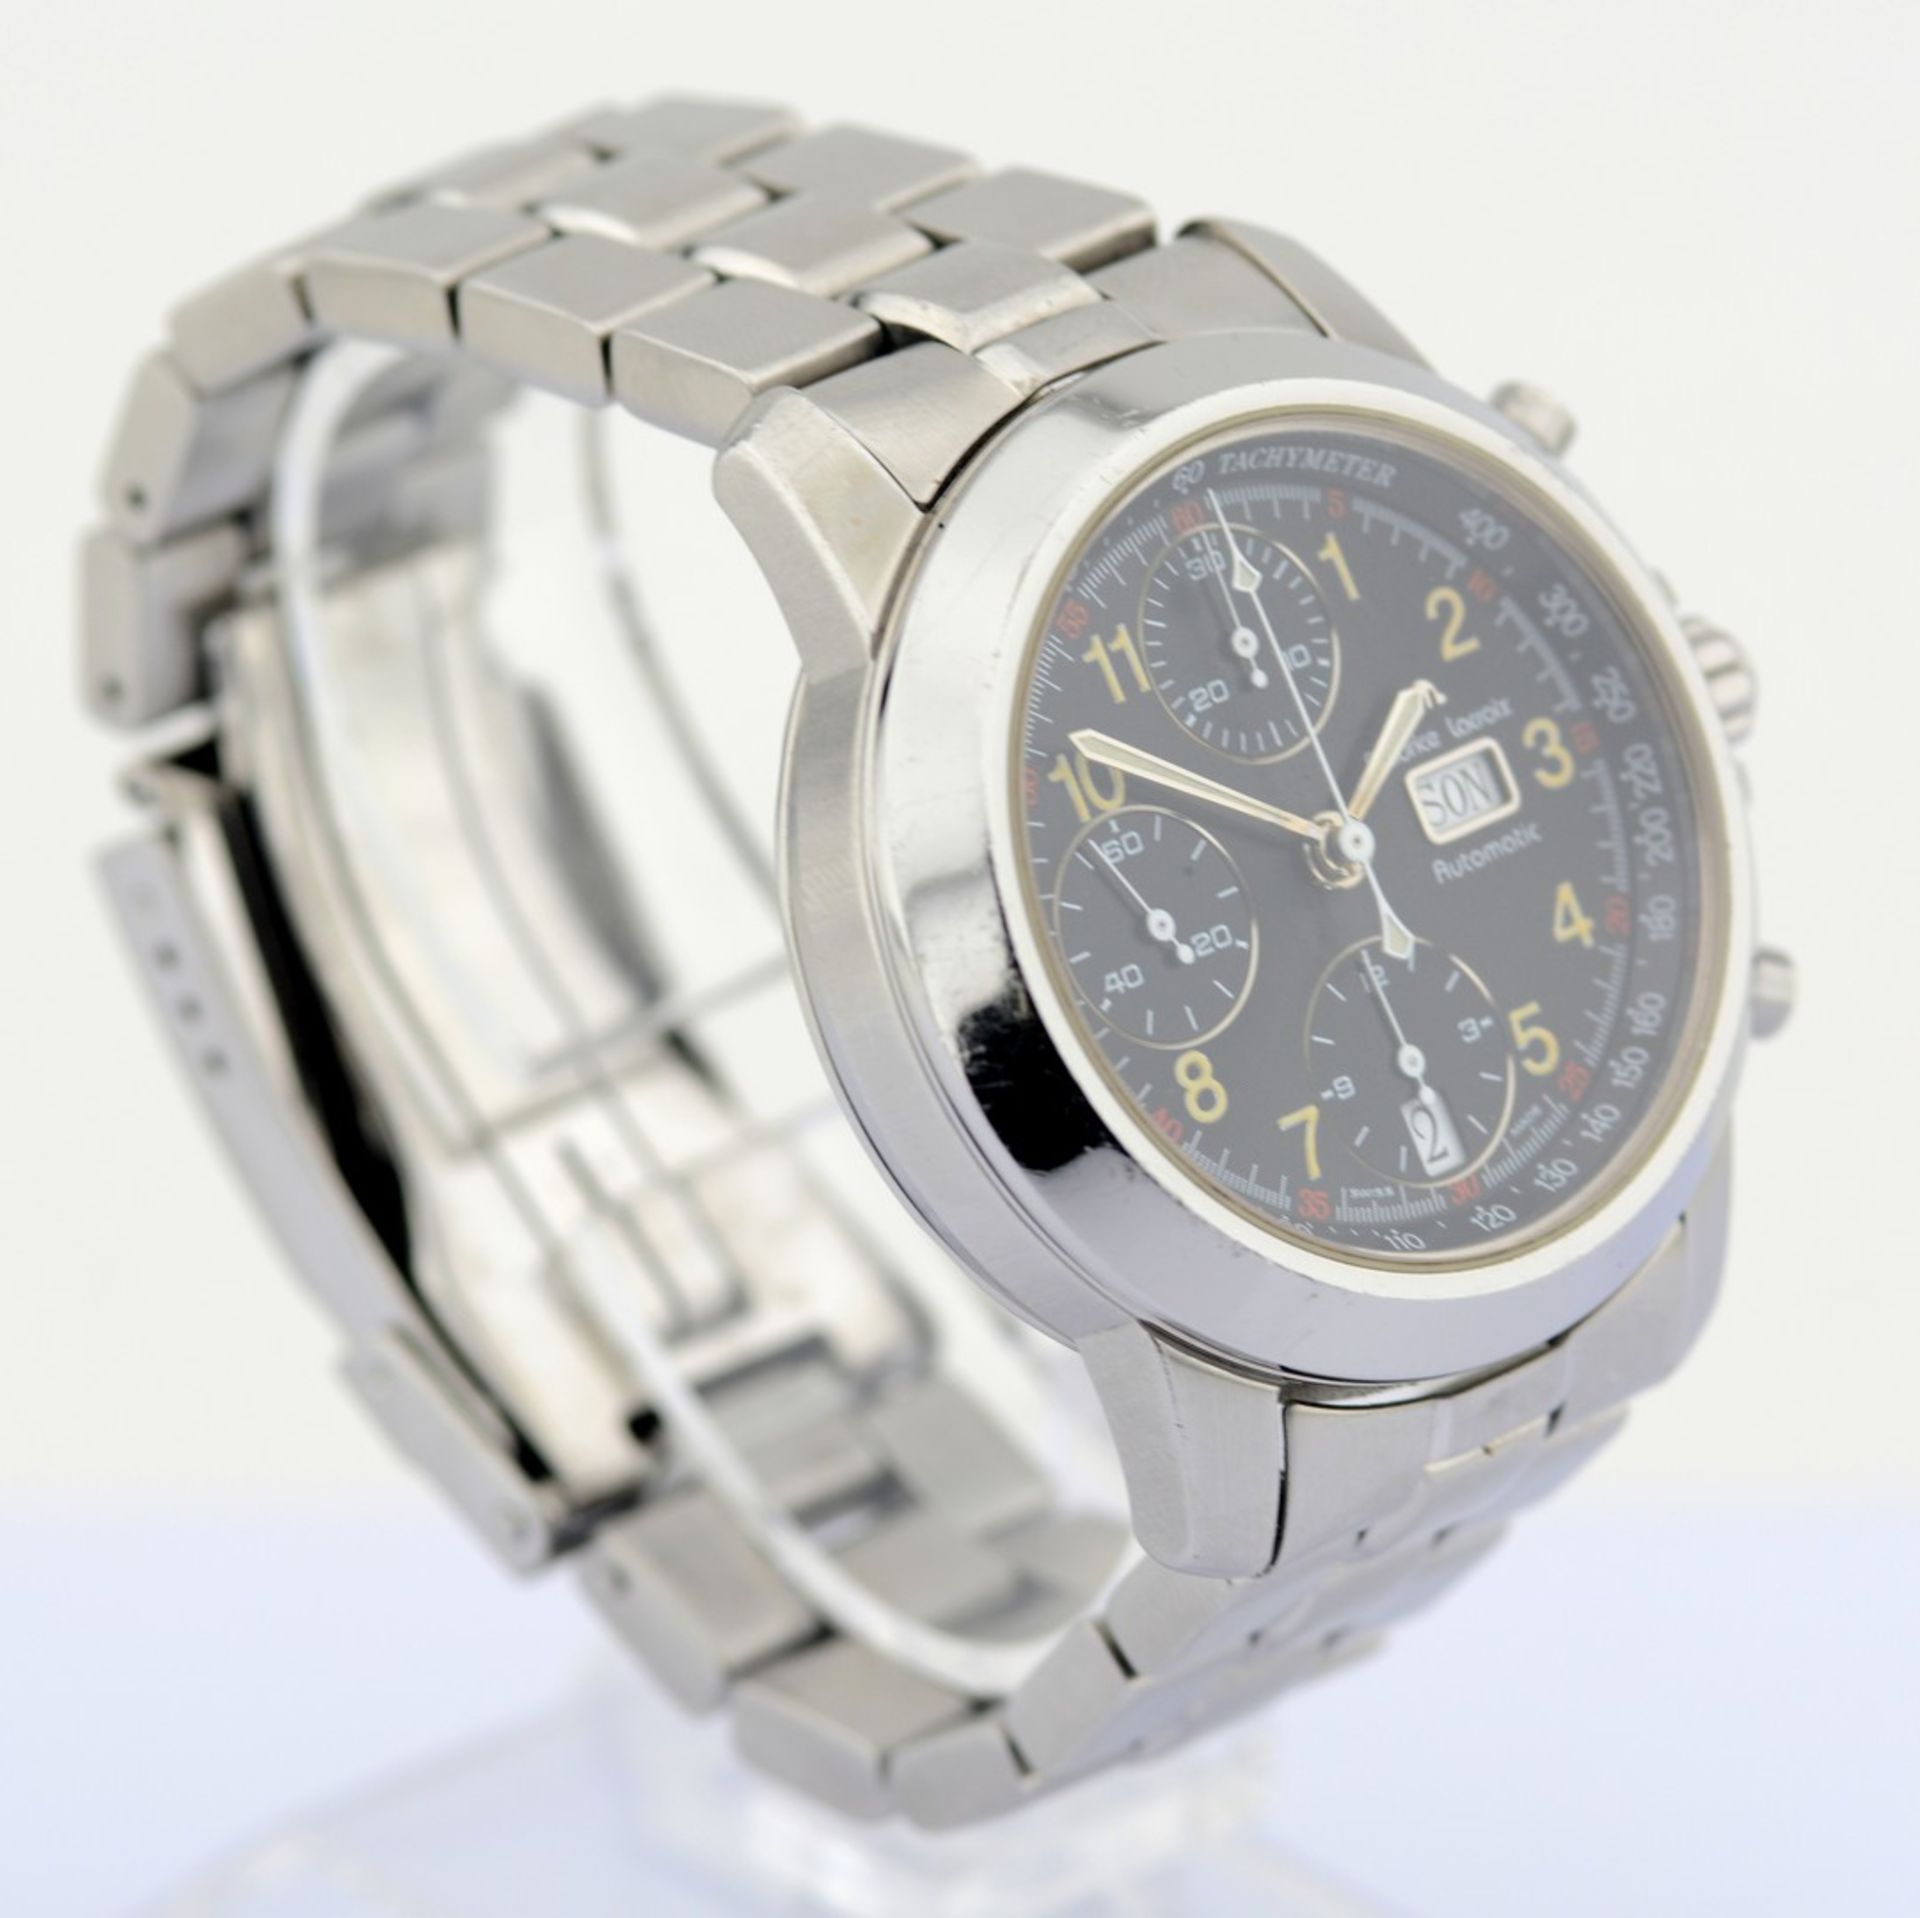 Maurice Lacroix / 39721 Automatic Chronograph - Gentlemen's Steel Wristwatch - Image 7 of 11